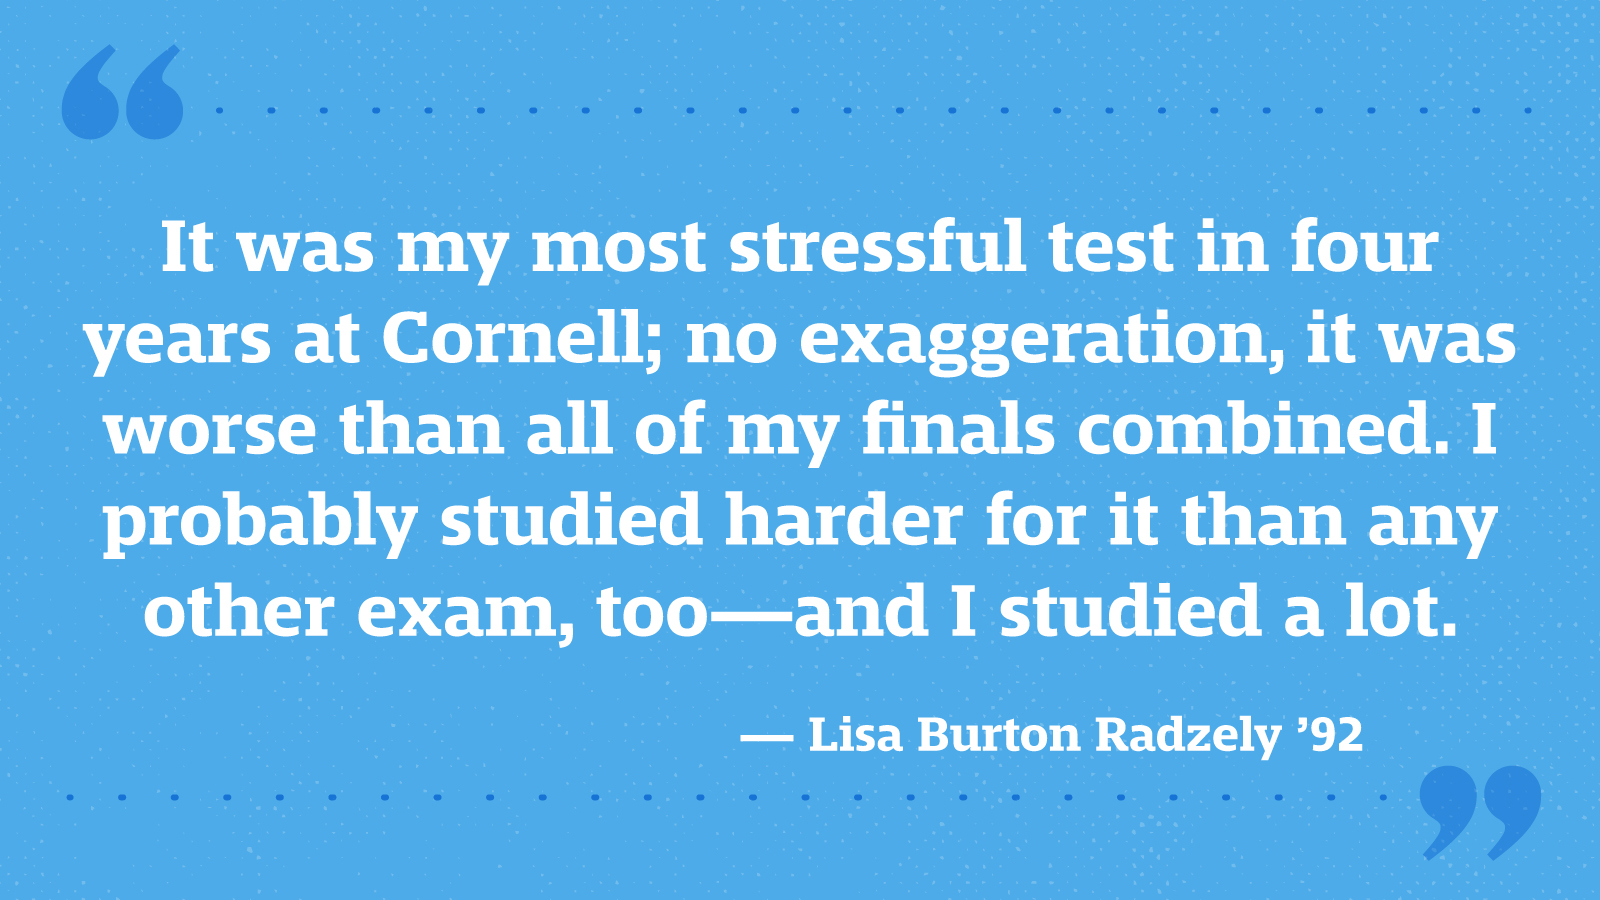 It was my most stressful test in four years at Cornell; no exaggeration, it was worse than all of my finals combined. I probably studied harder for it than any other exam, too—and I studied a lot. — Lisa Burton Radzely ’92